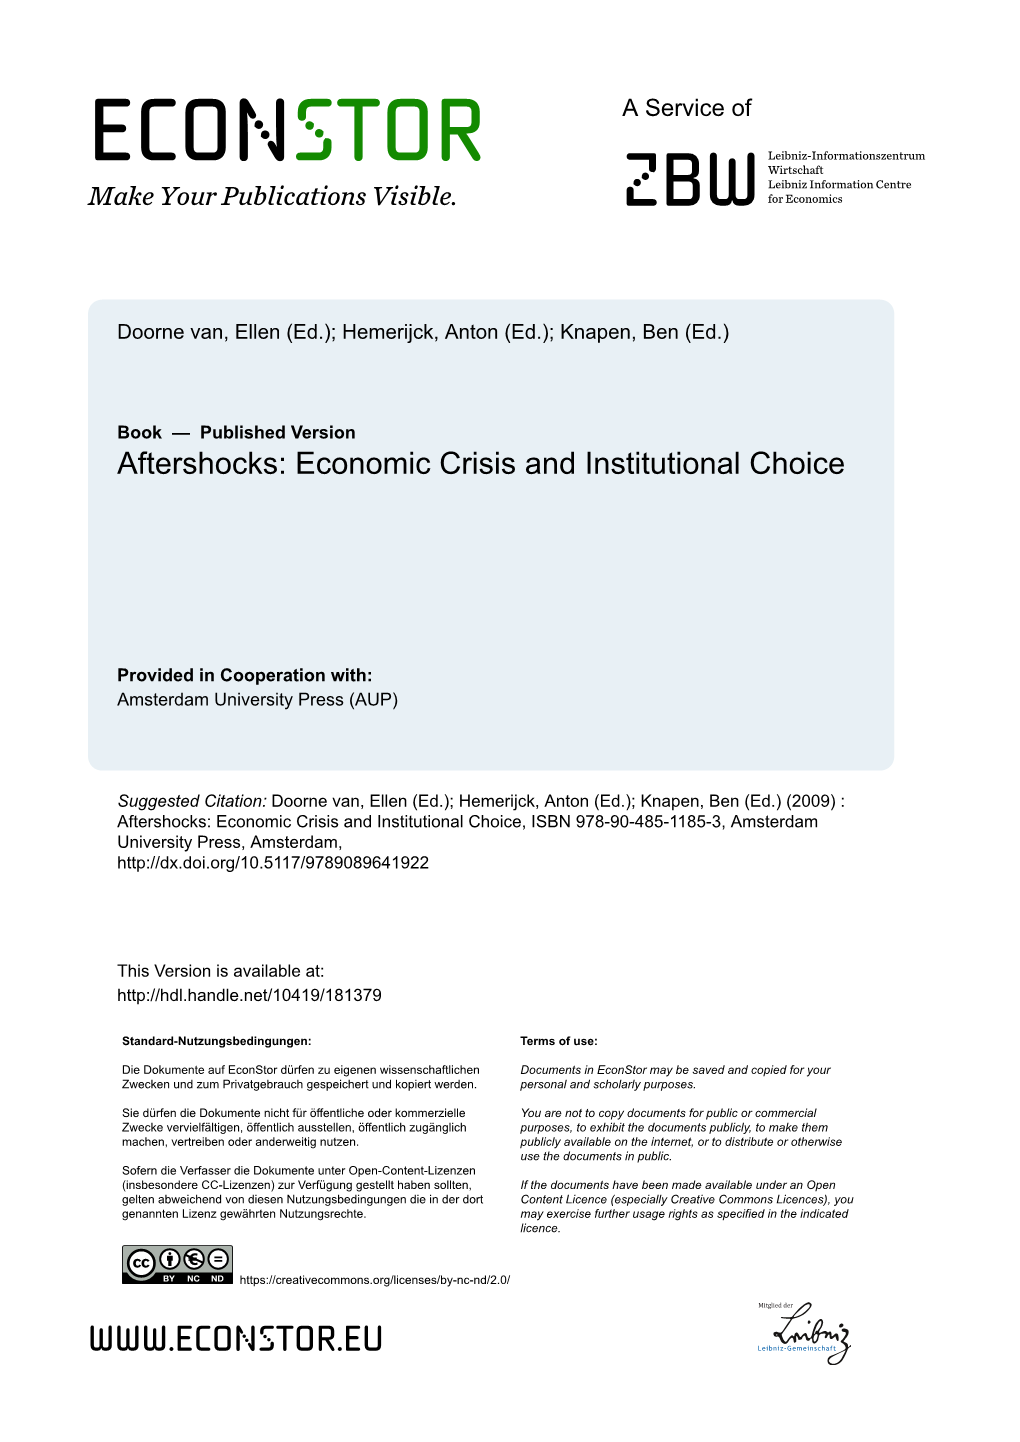 Economic Crisis and Institutional Choice